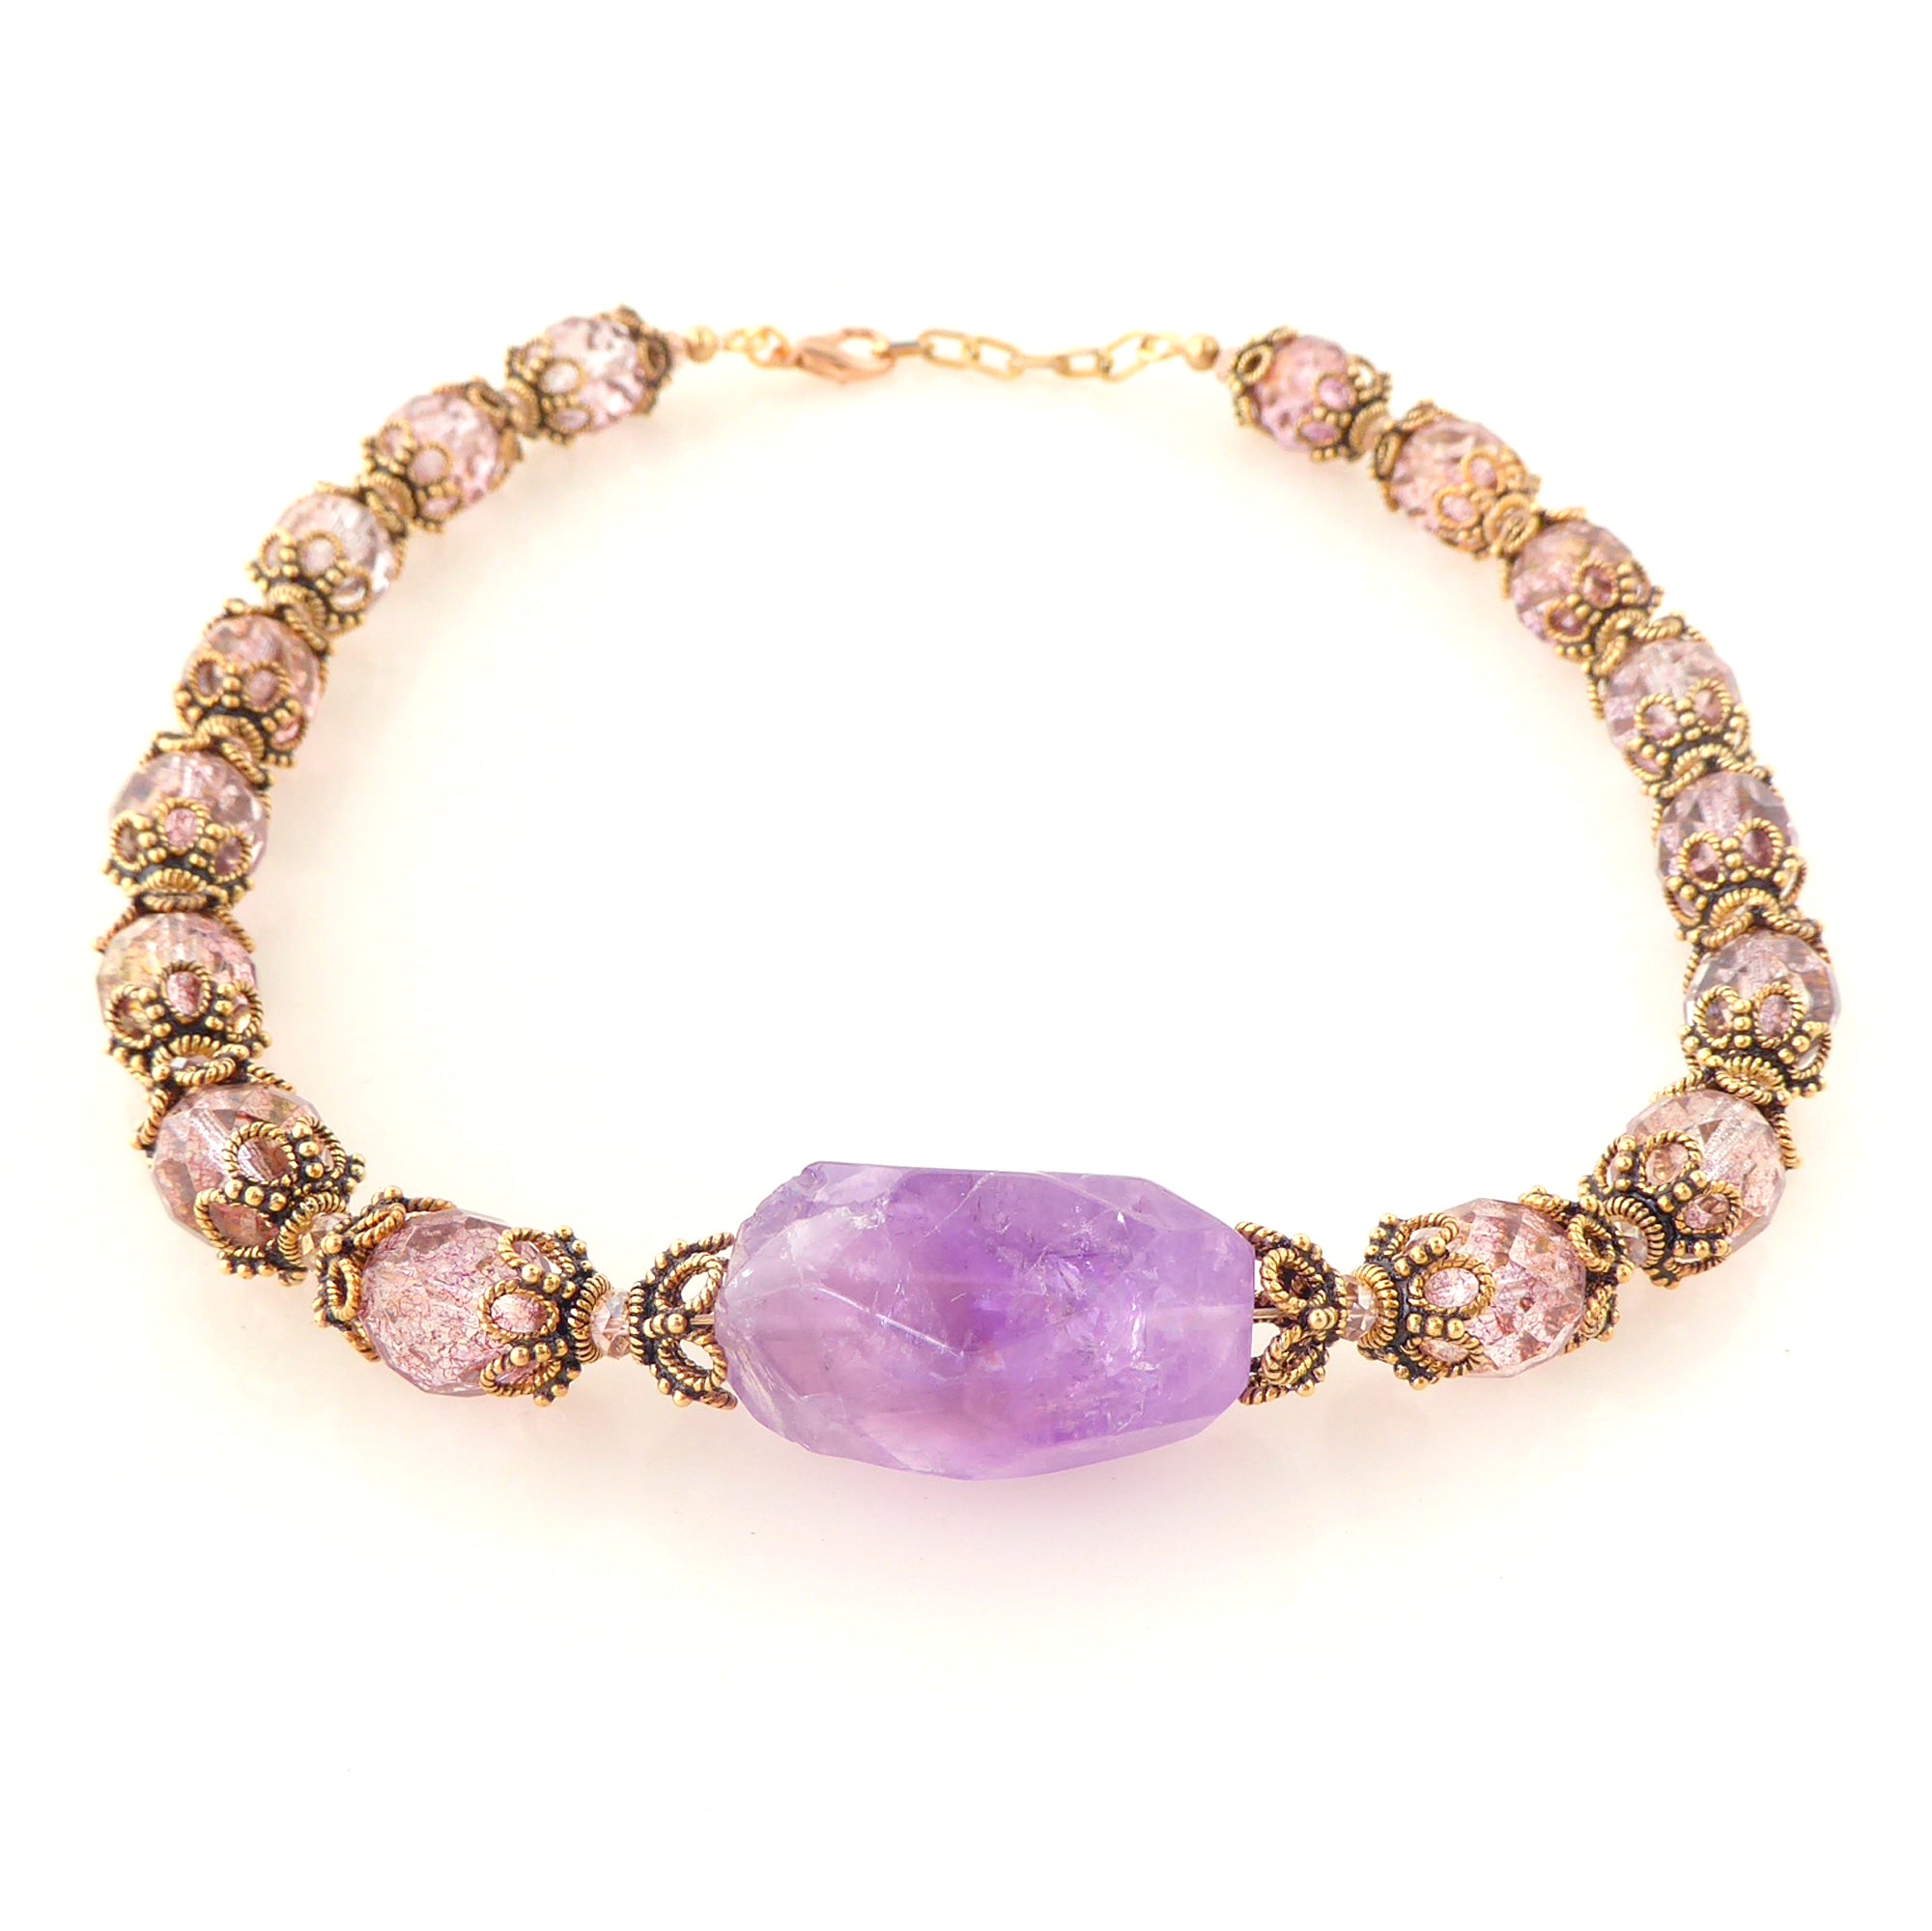 Amethyst rococo necklace by Jenny Dayco 3